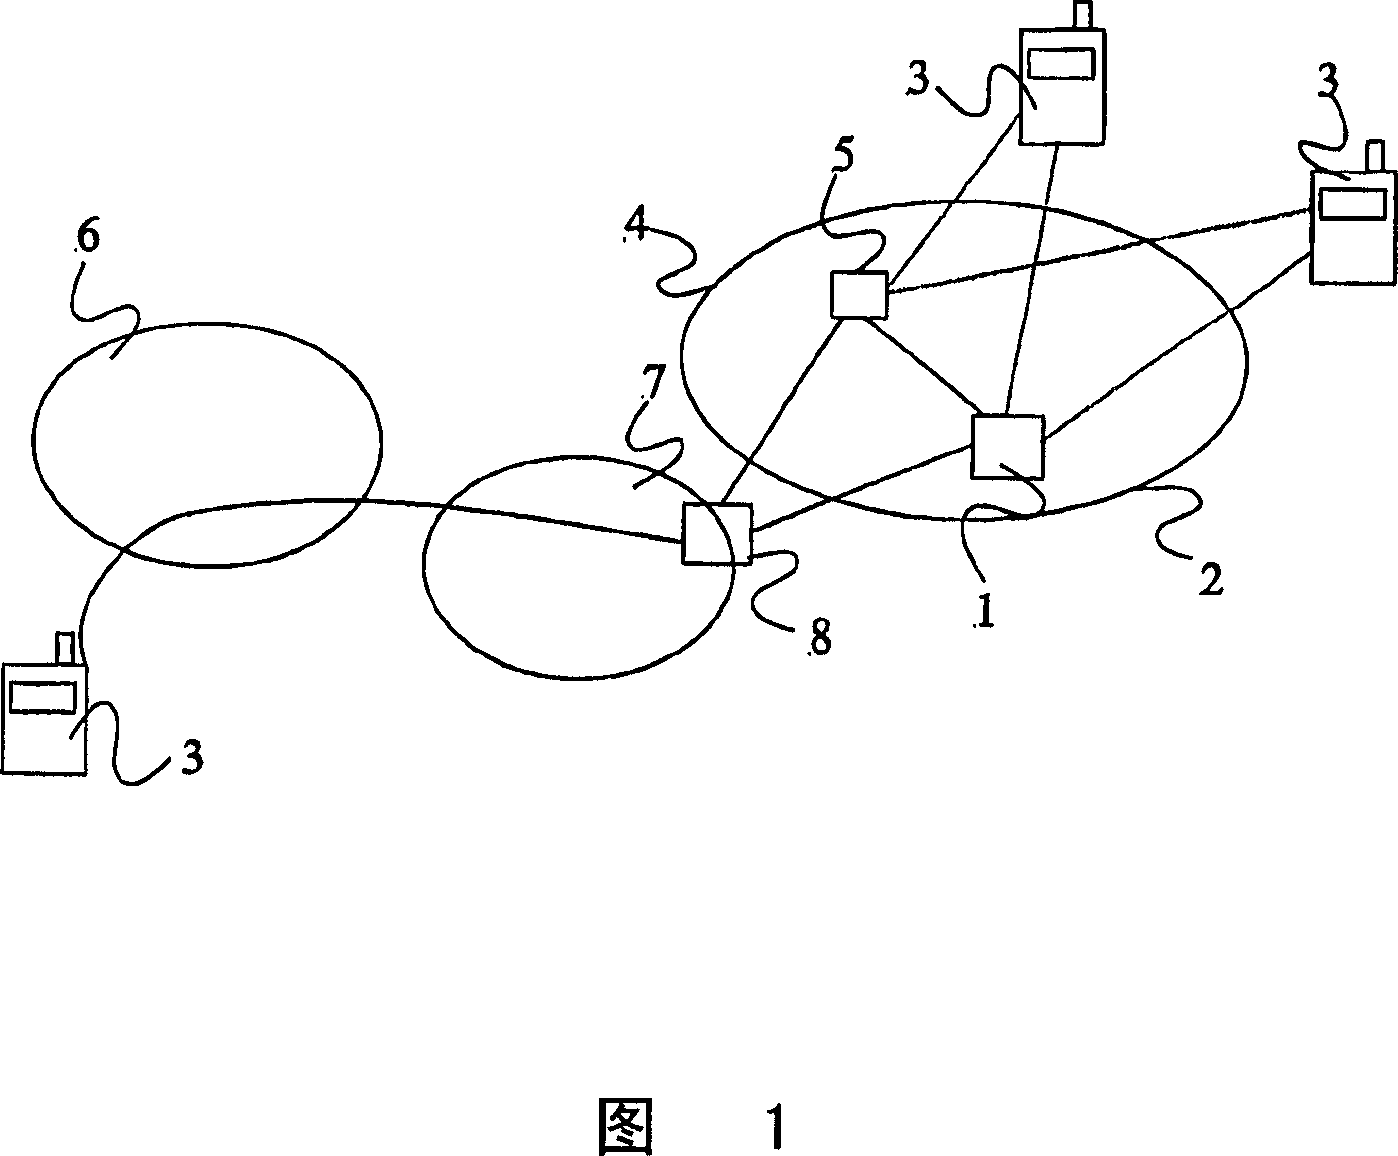 Resource usage in optimized sectionalization exchanging network